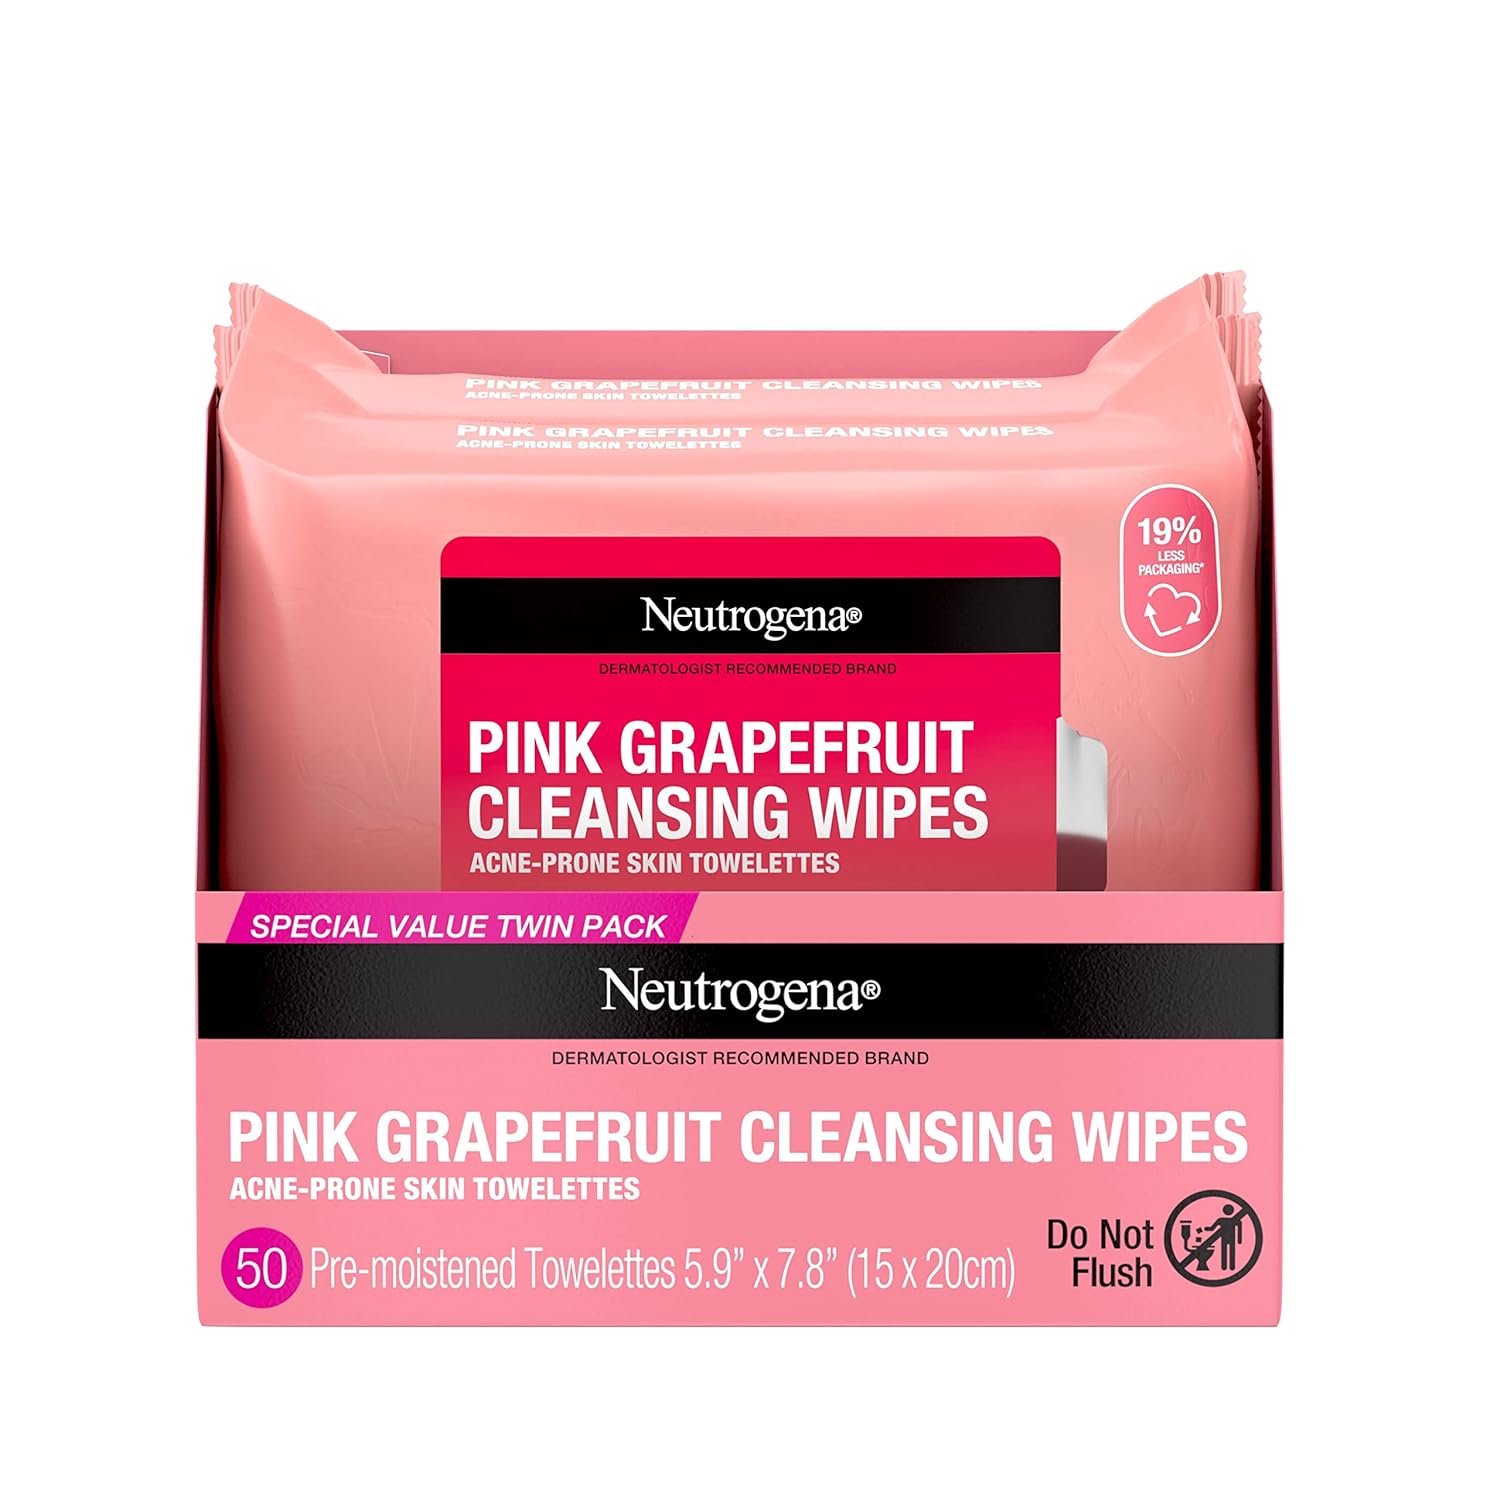 Neutrogena Oil Free Facial Cleansing Makeup Wipes with Pink Grapefruit – A Must-Have for Acne Prone Skin